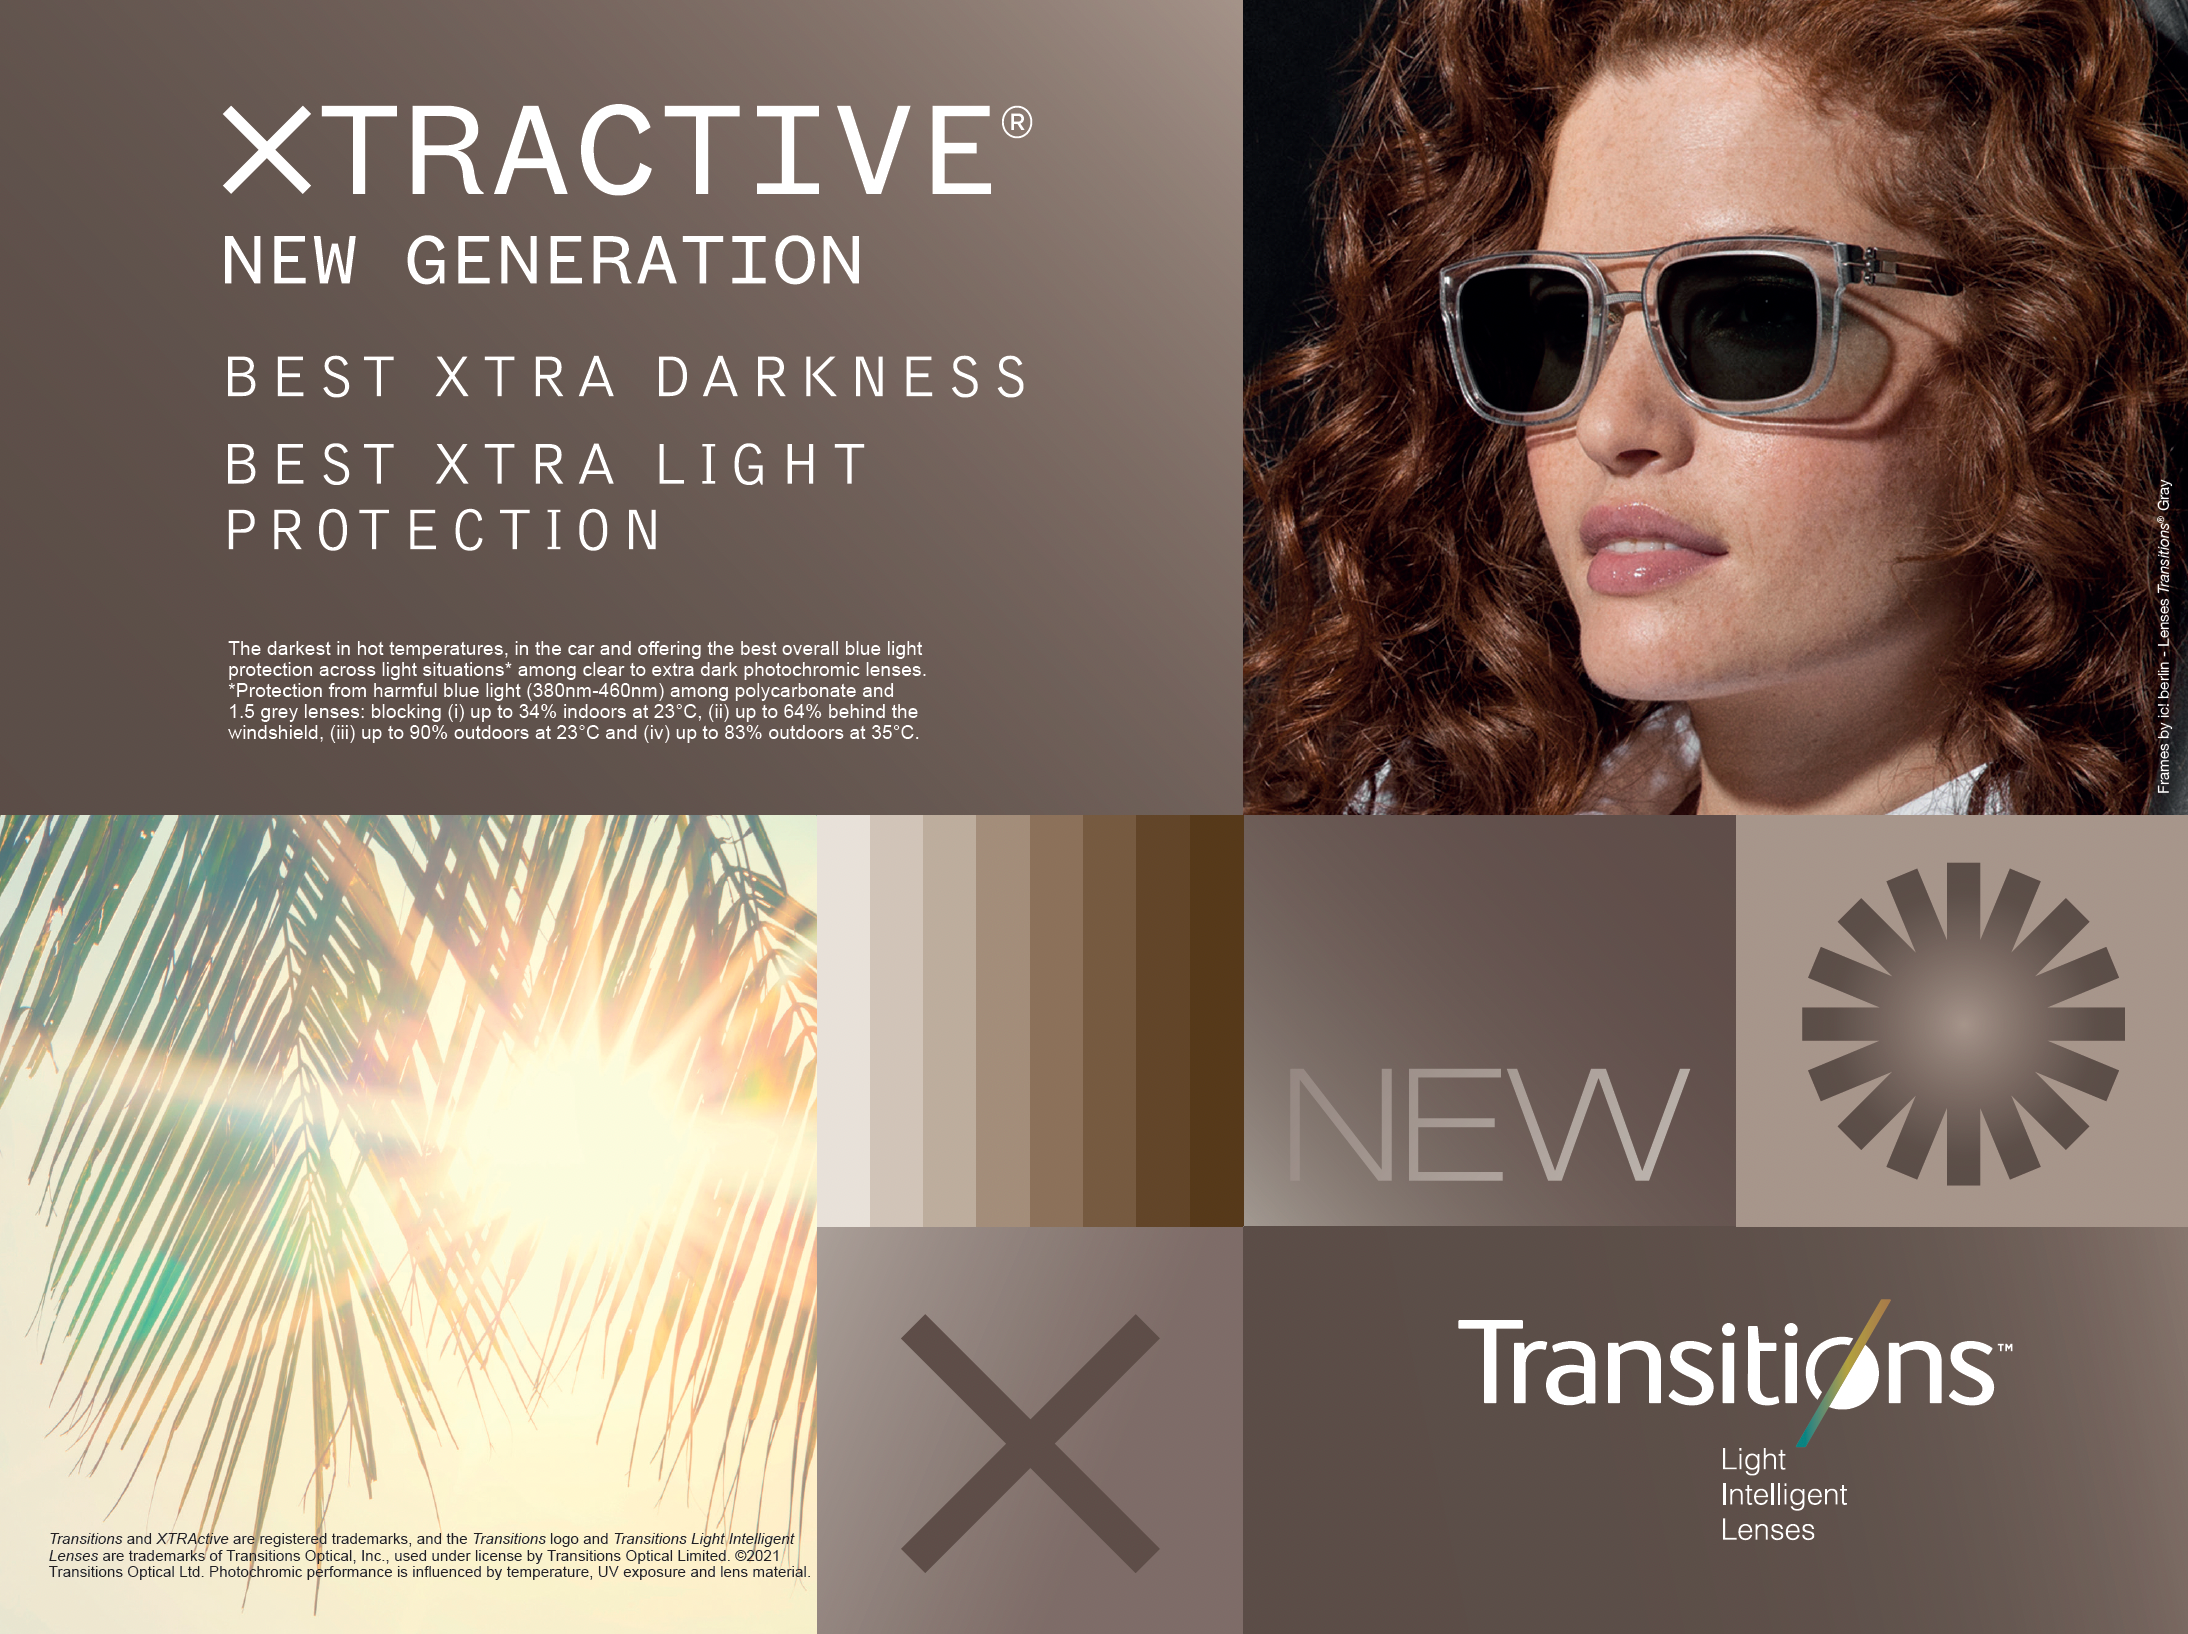 Essilor releases new Transitions XTRActive lenses for light sensitivity